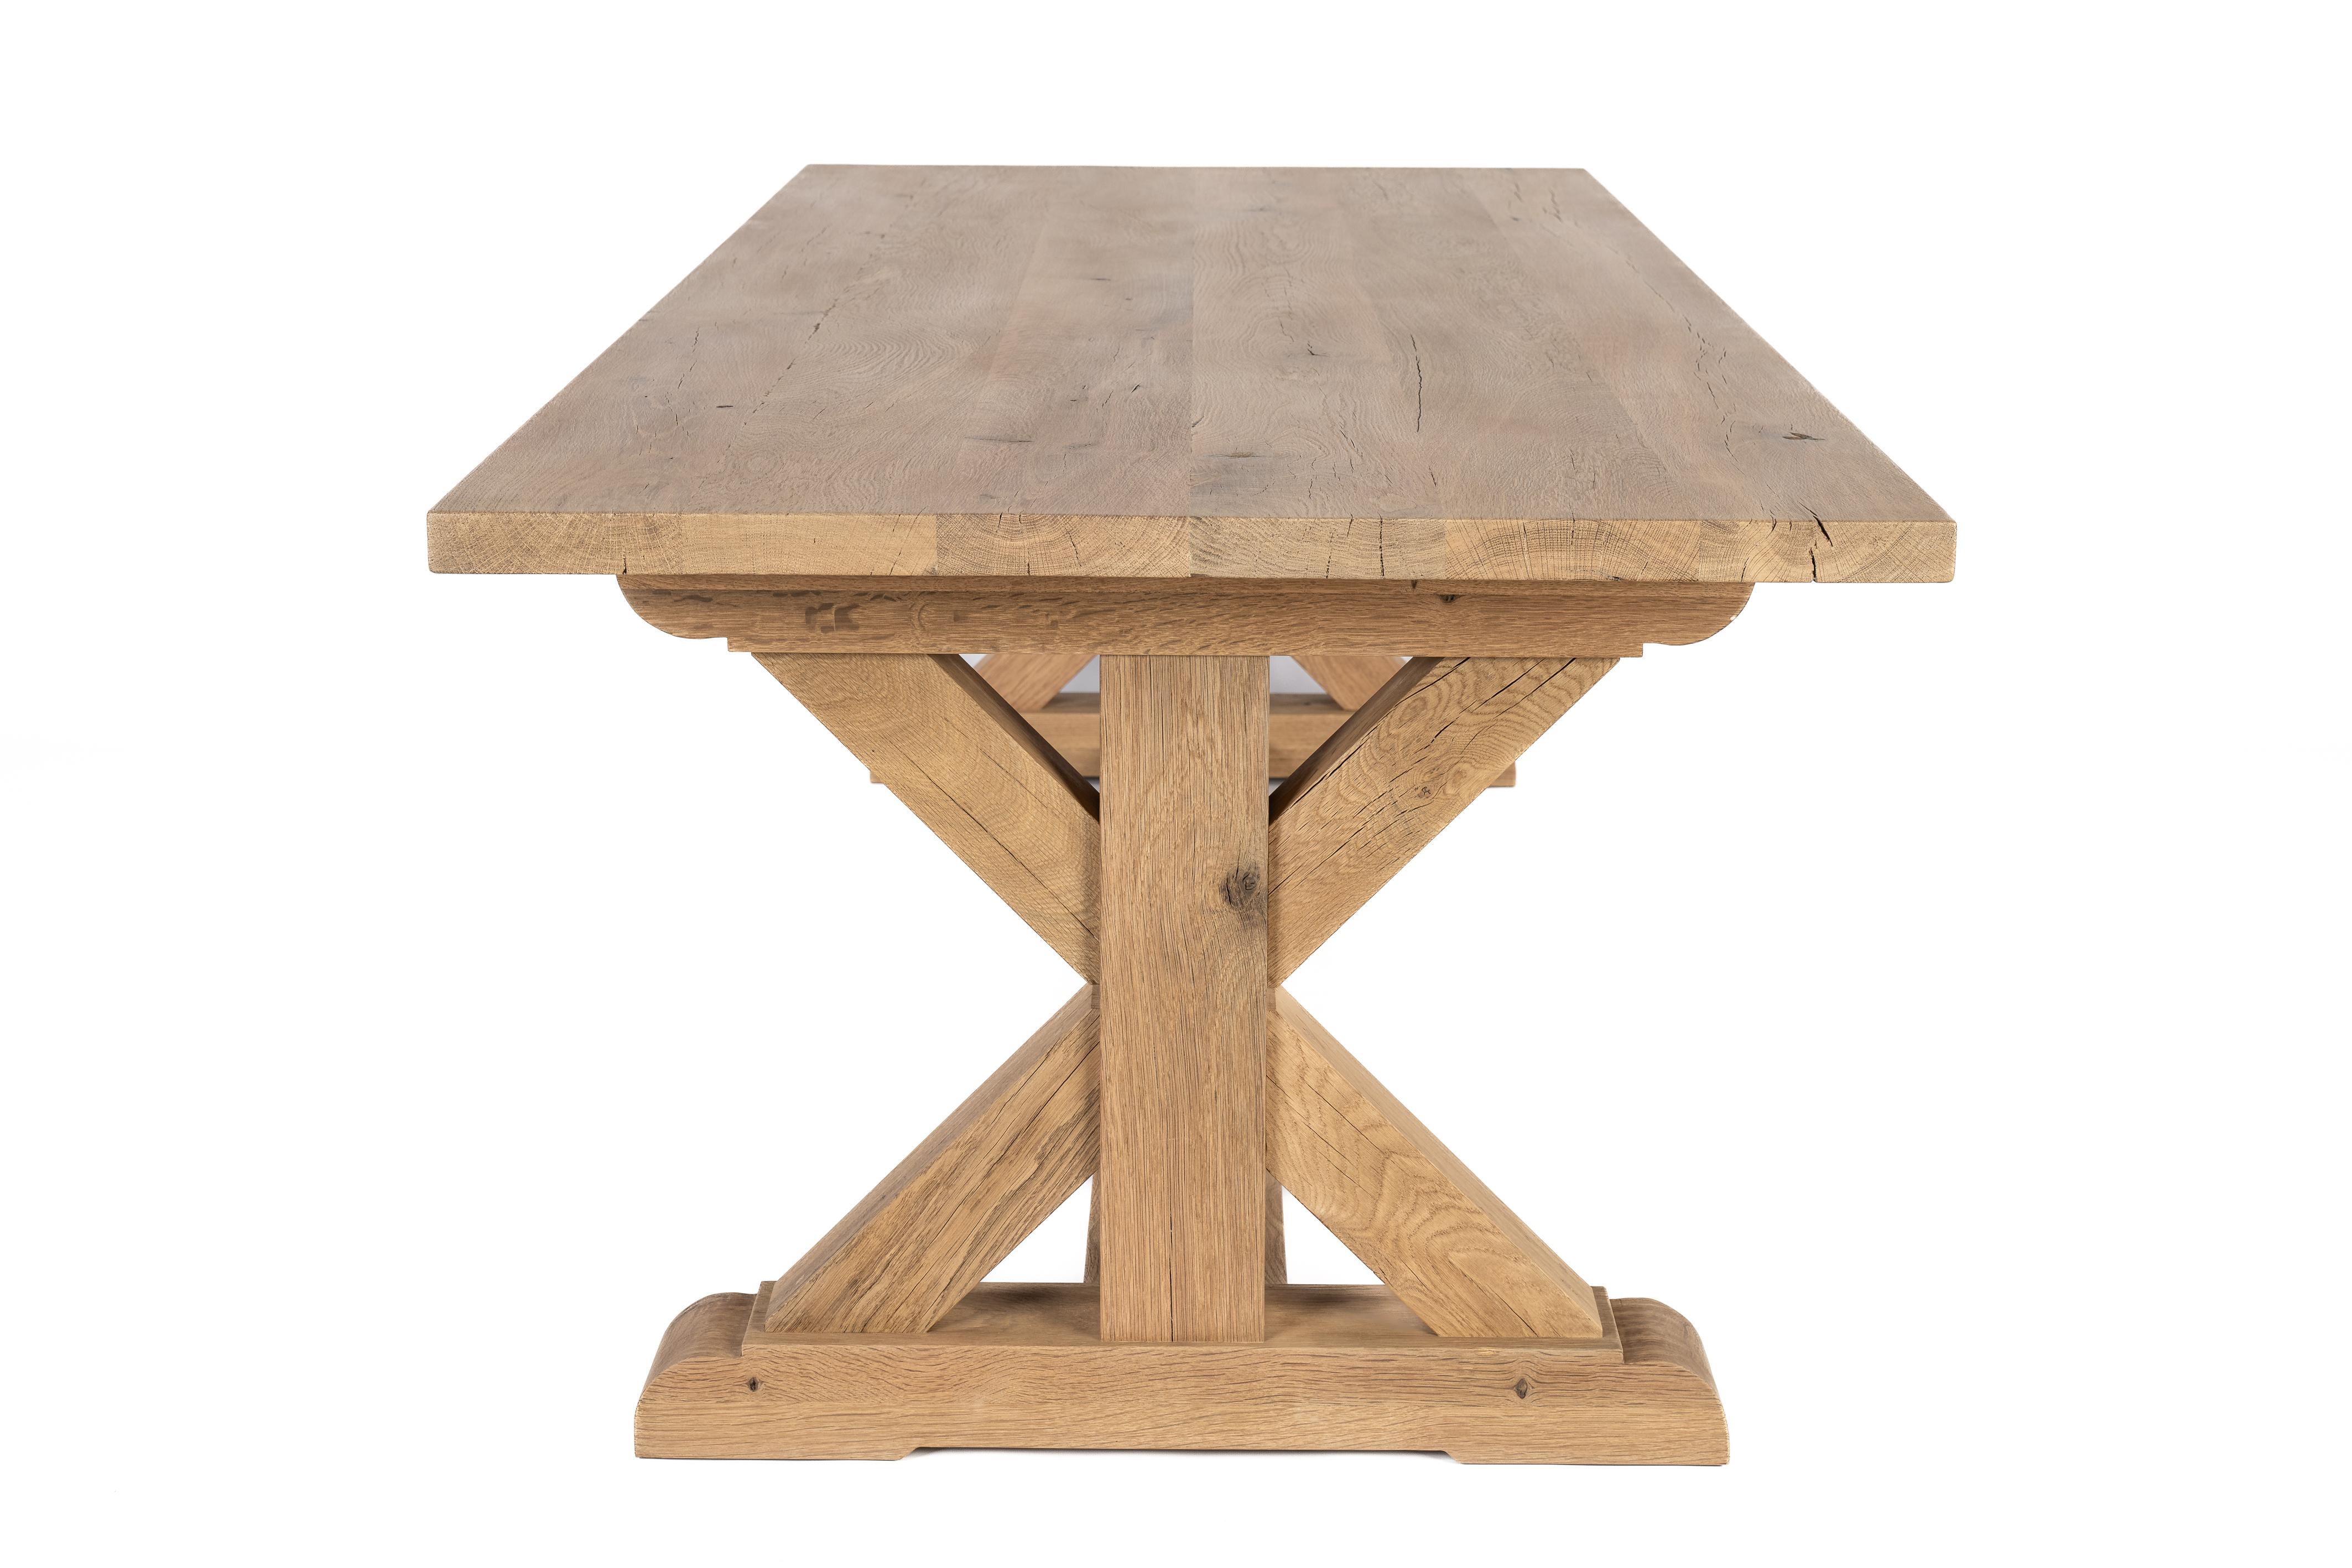 Dutch Bespoke Solid Aged French Natural Oak Monastery Table In Matte Finish For Sale